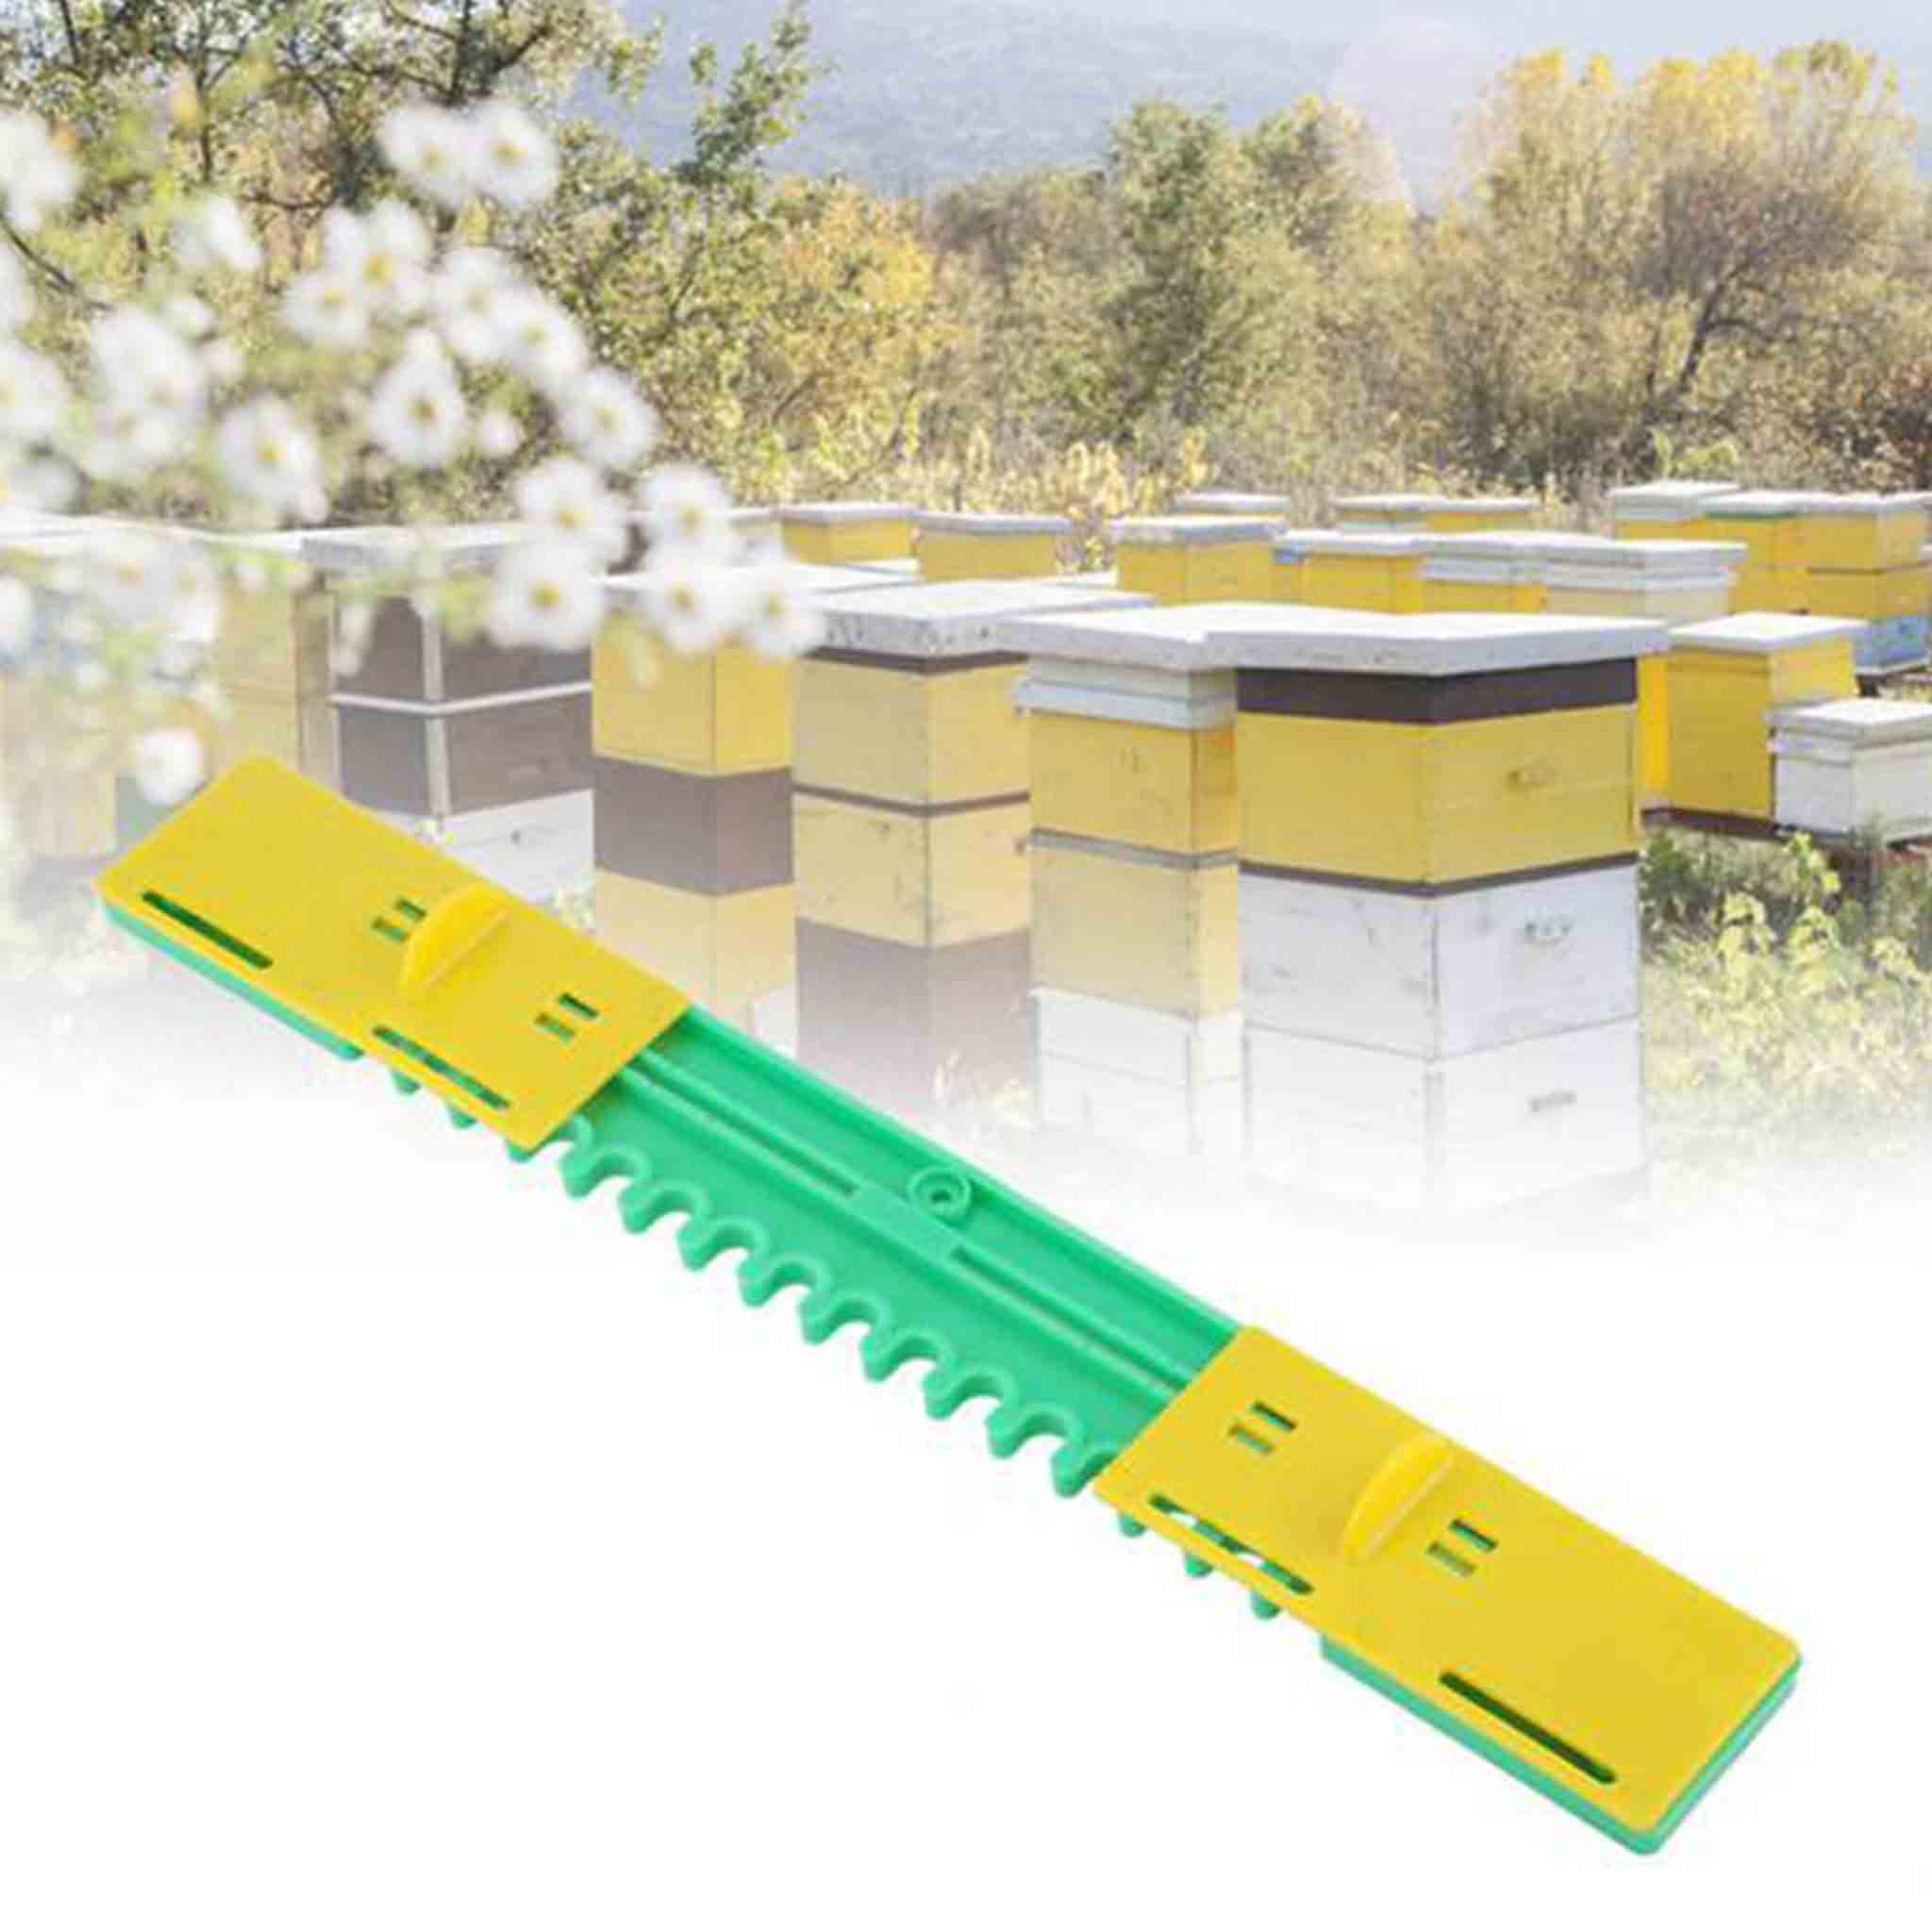 Beehive Entrance Reducer with Slider - Plastic - Hive Parts collection by Buzzbee Beekeeping Supplies